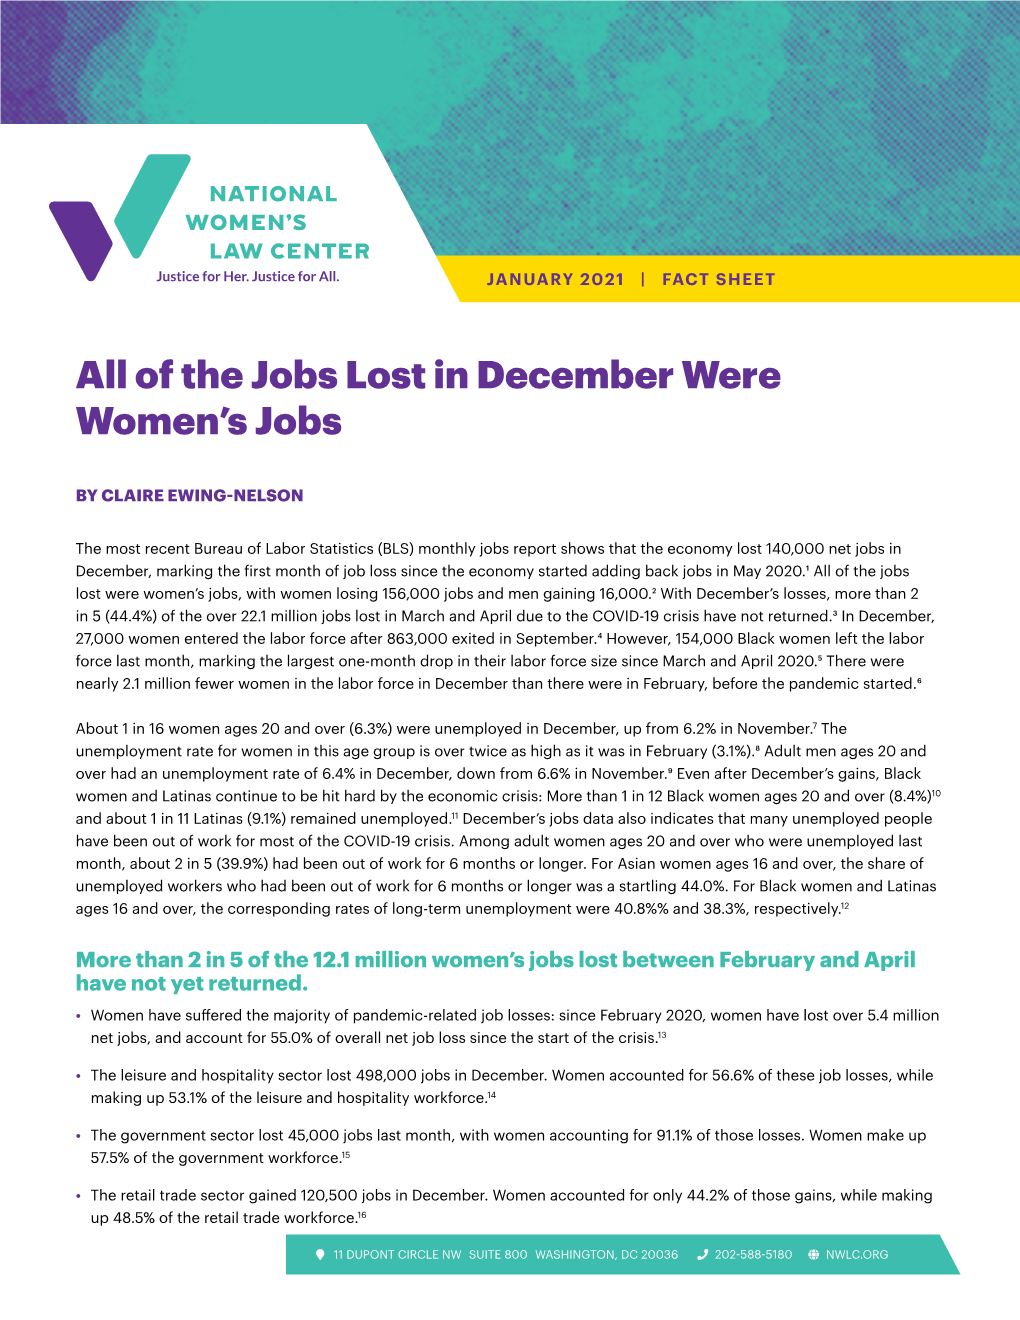 All of the Jobs Lost in December Were Women's Jobs